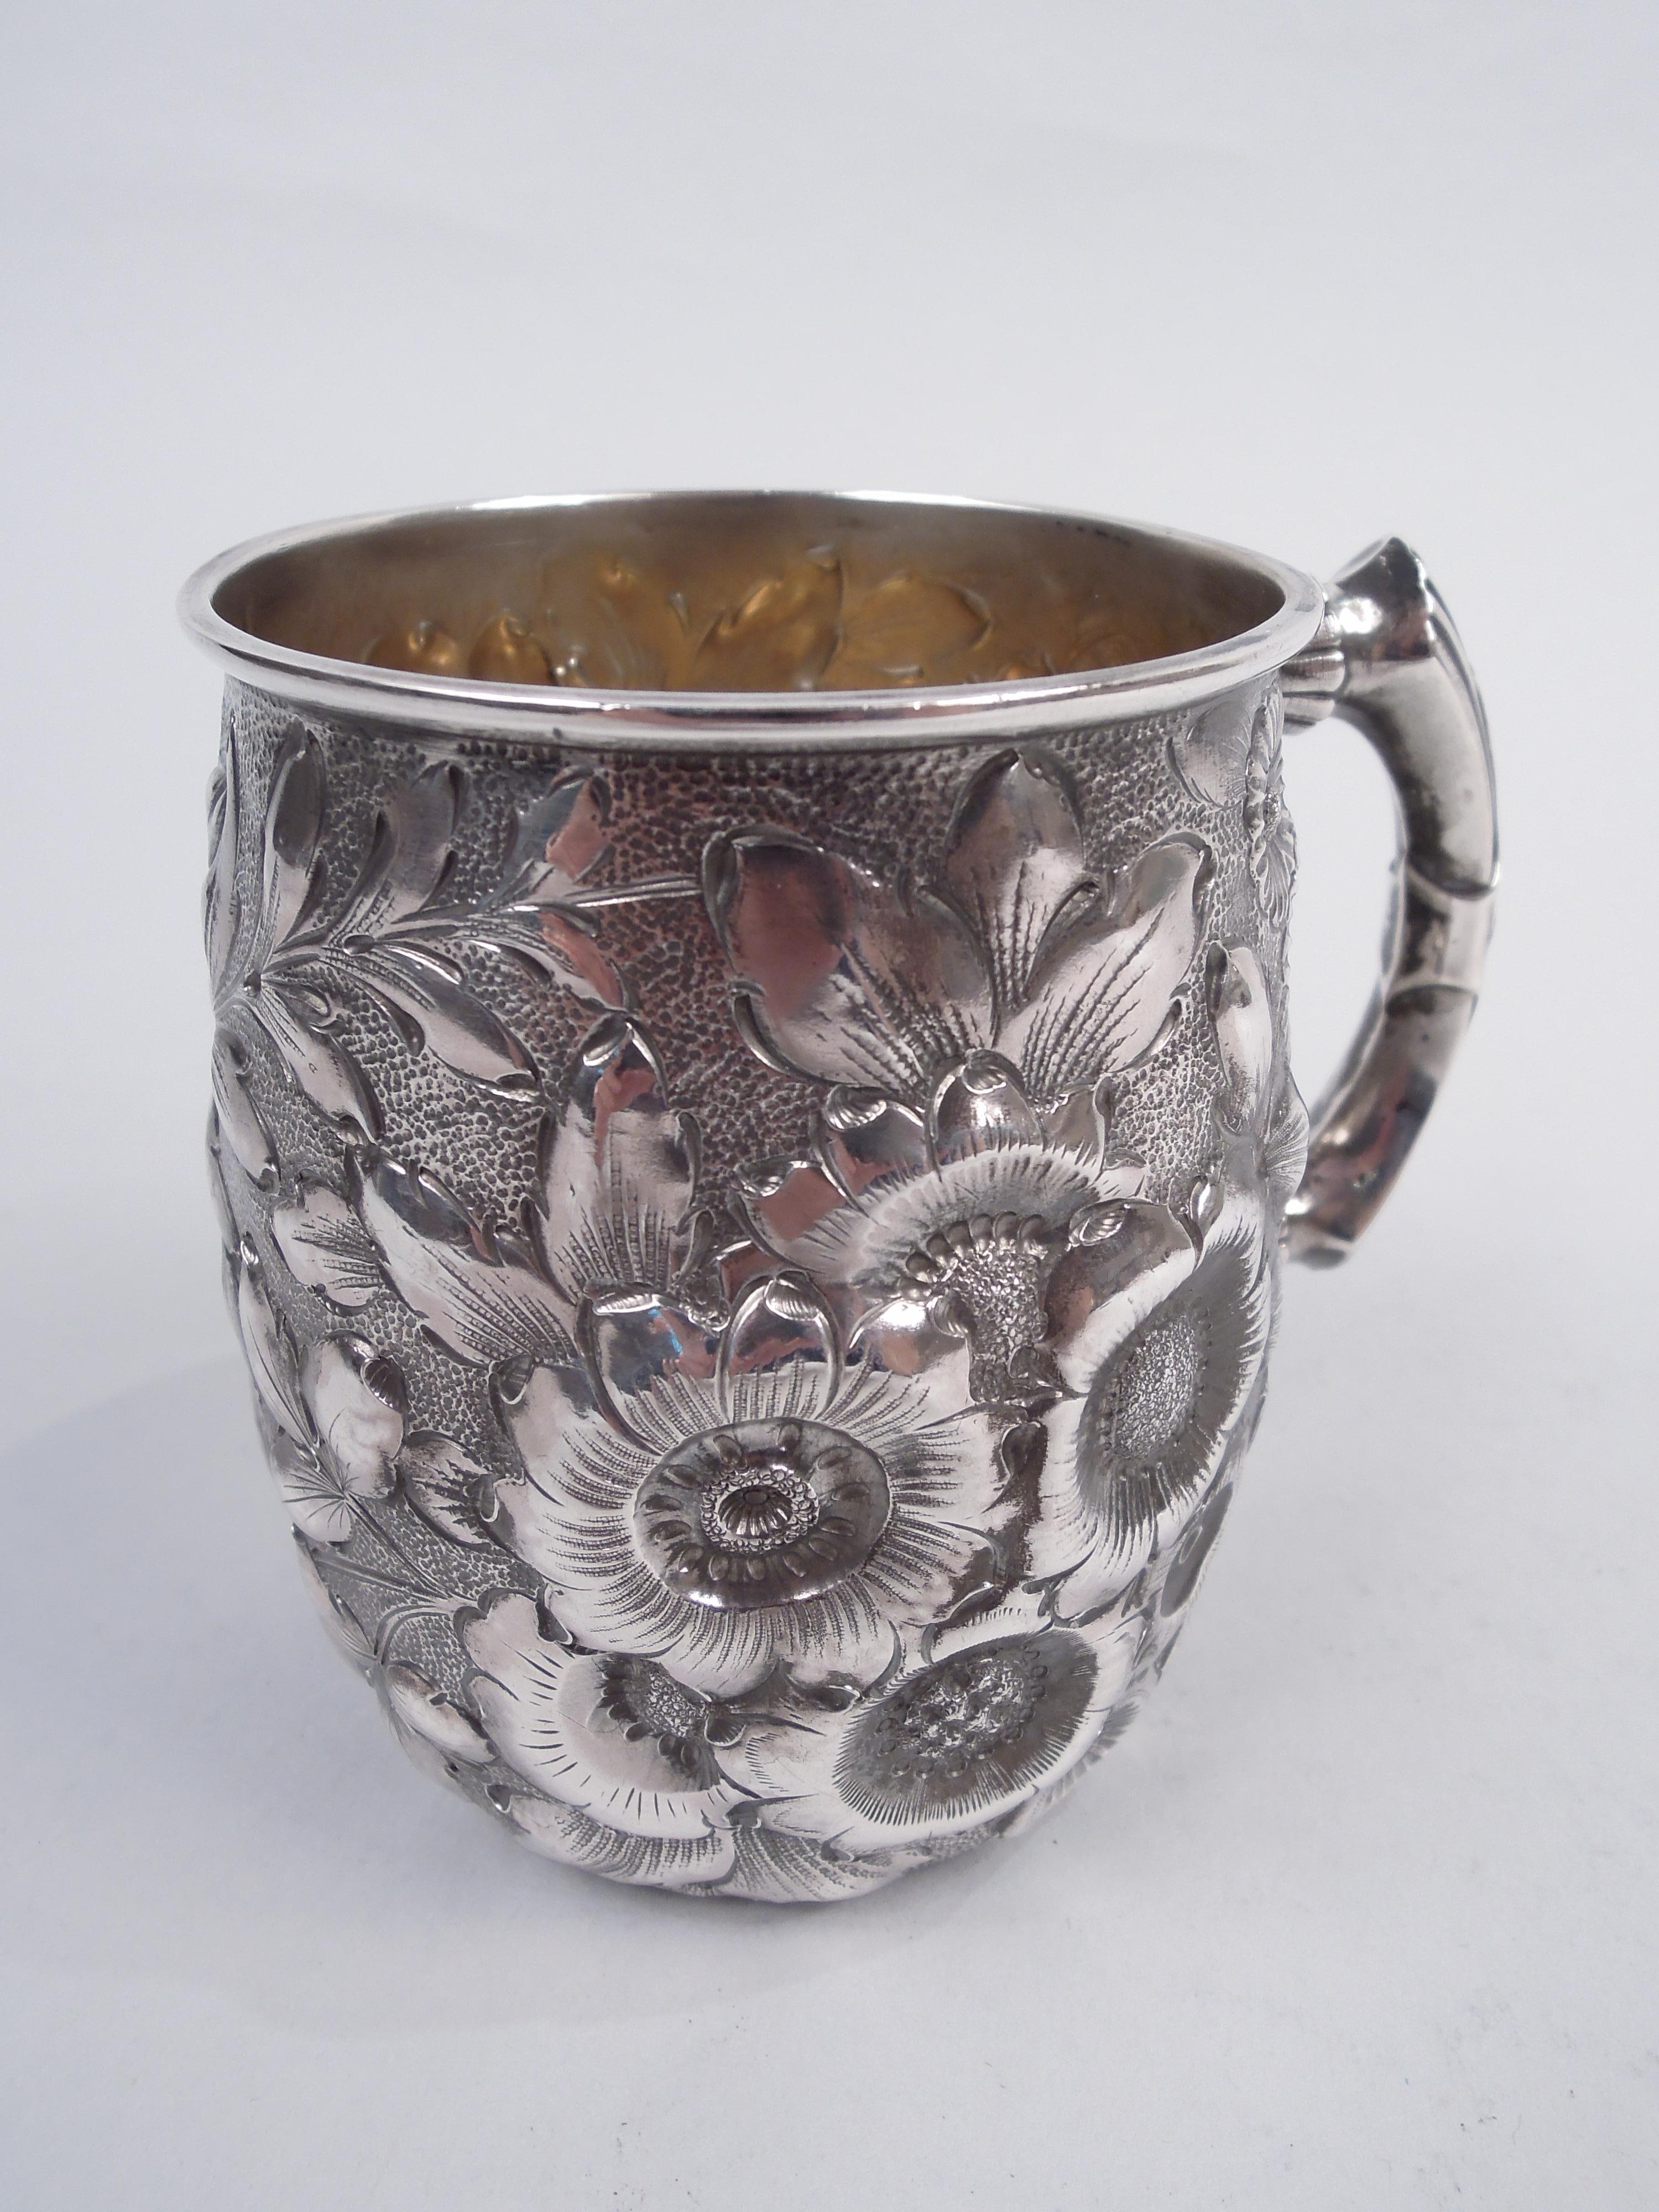 Victorian sterling silver baby cup. Made by George W. Shiebler & Co. in New York, ca 1890. Curved bowl with allover frond and flower repousse on stippled ground. Reeded scroll bracket handle wrapped with applied band decorated with stylized flower